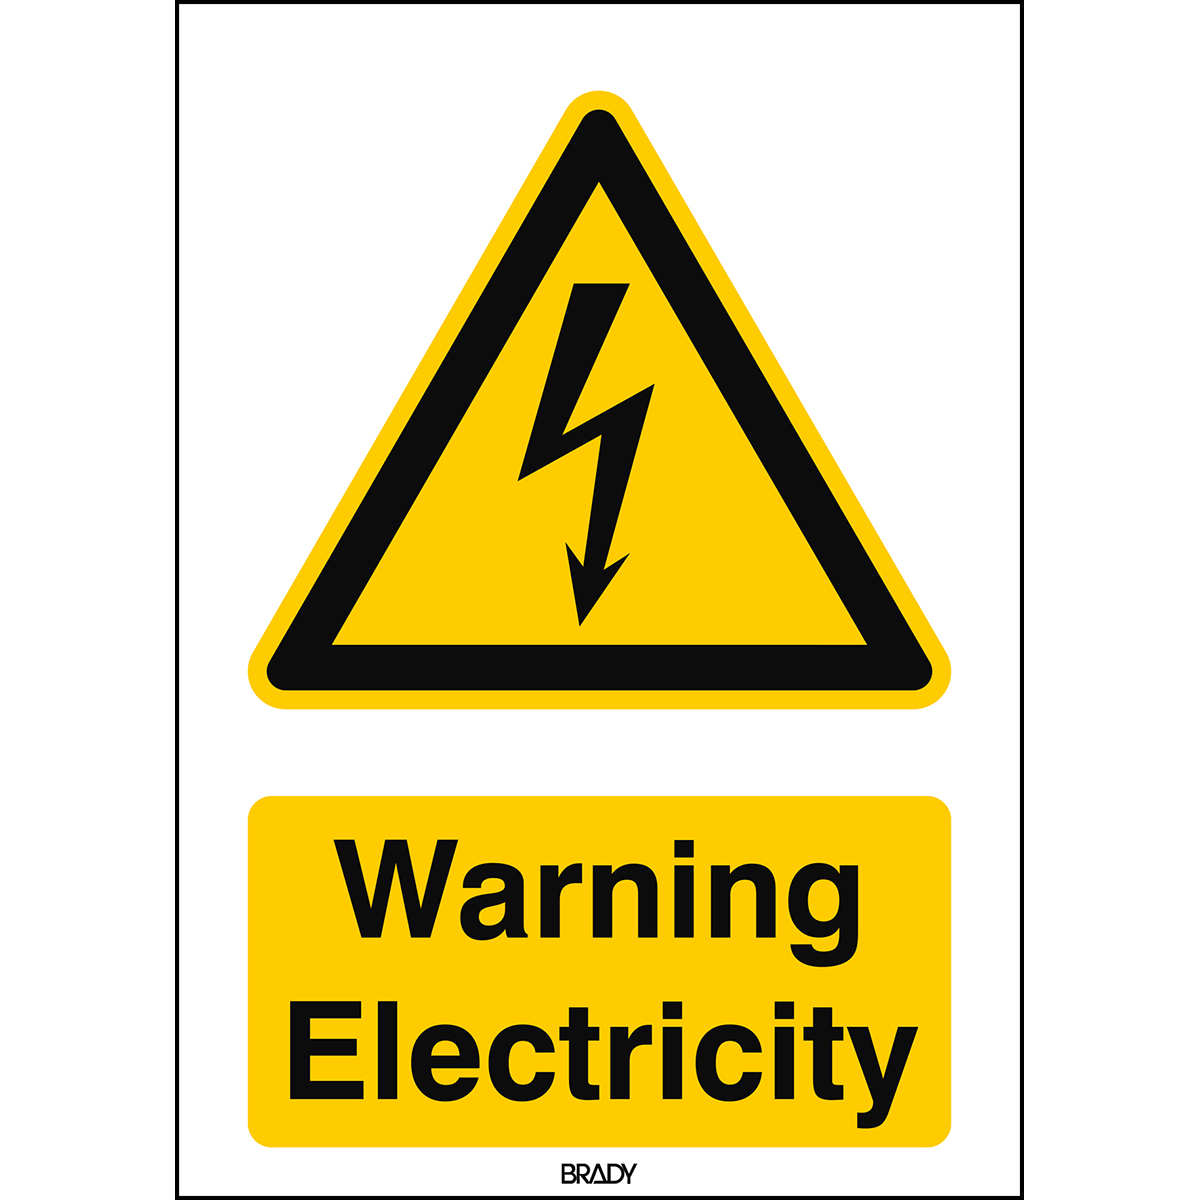 Brady Part: 828158 | ISO Safety Sign - Warning, Electricity | www